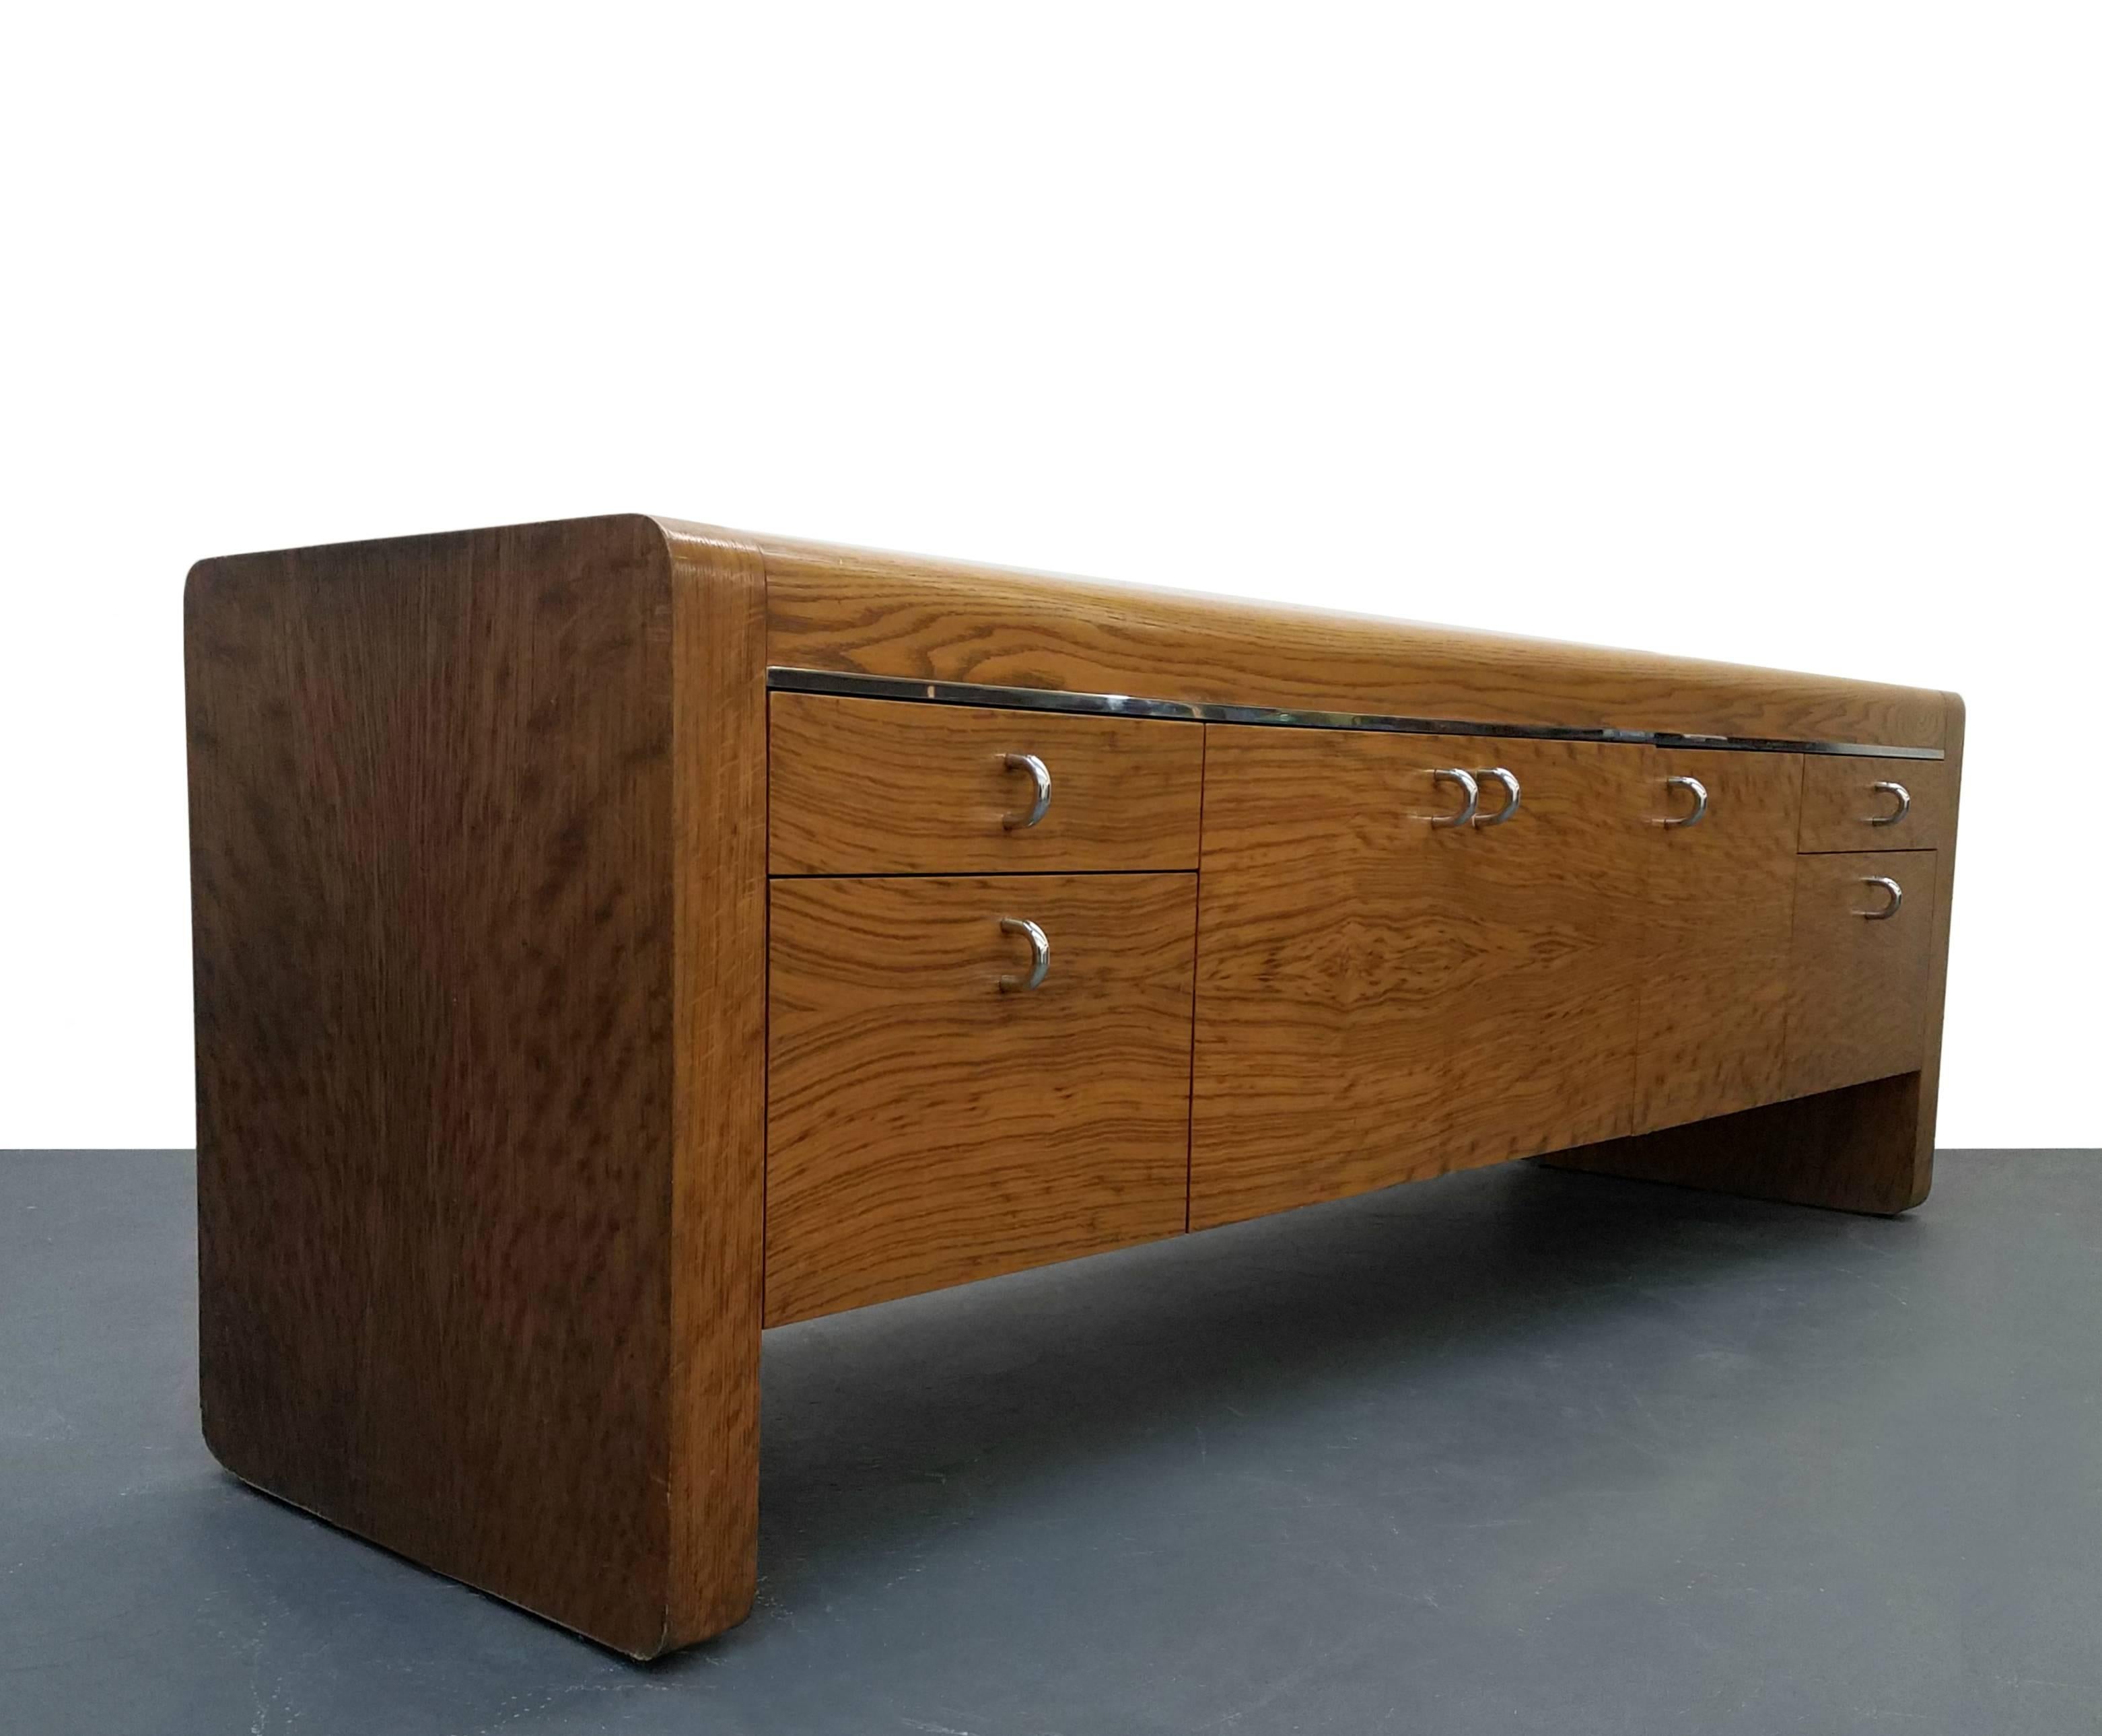 Dress it up or down, this massive 90" credenza would look amazing in a modern office or an urban loft. At over 7 feet this piece can accommodate quite the gamut of large art pieces and decor.

Constructed out of beautifully grained tiger oak